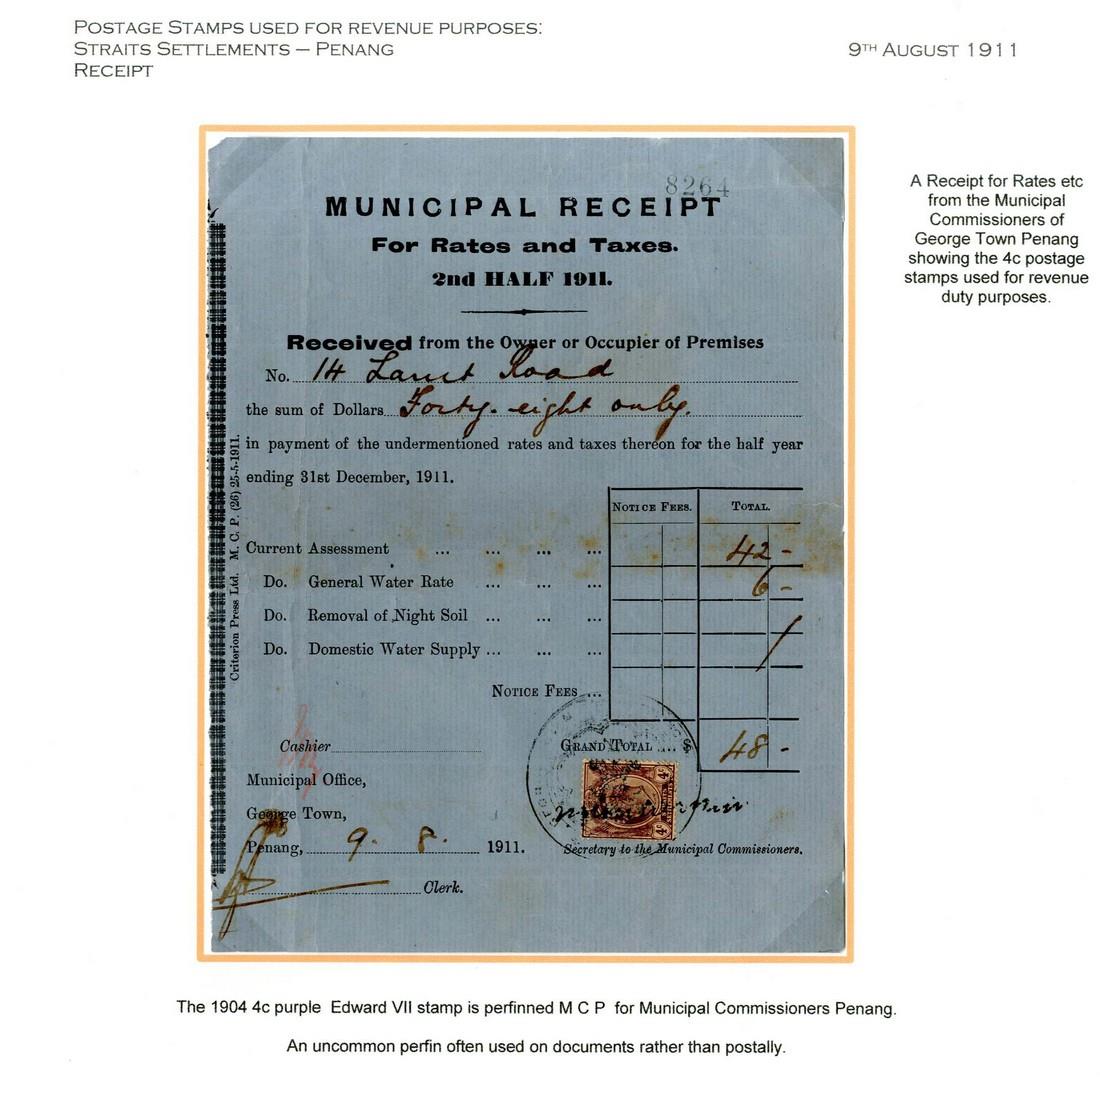 RevenuePostage and Revenue Adhesive Stamps used for RevenuePenang1911 (9 Aug.) Receipt for rates